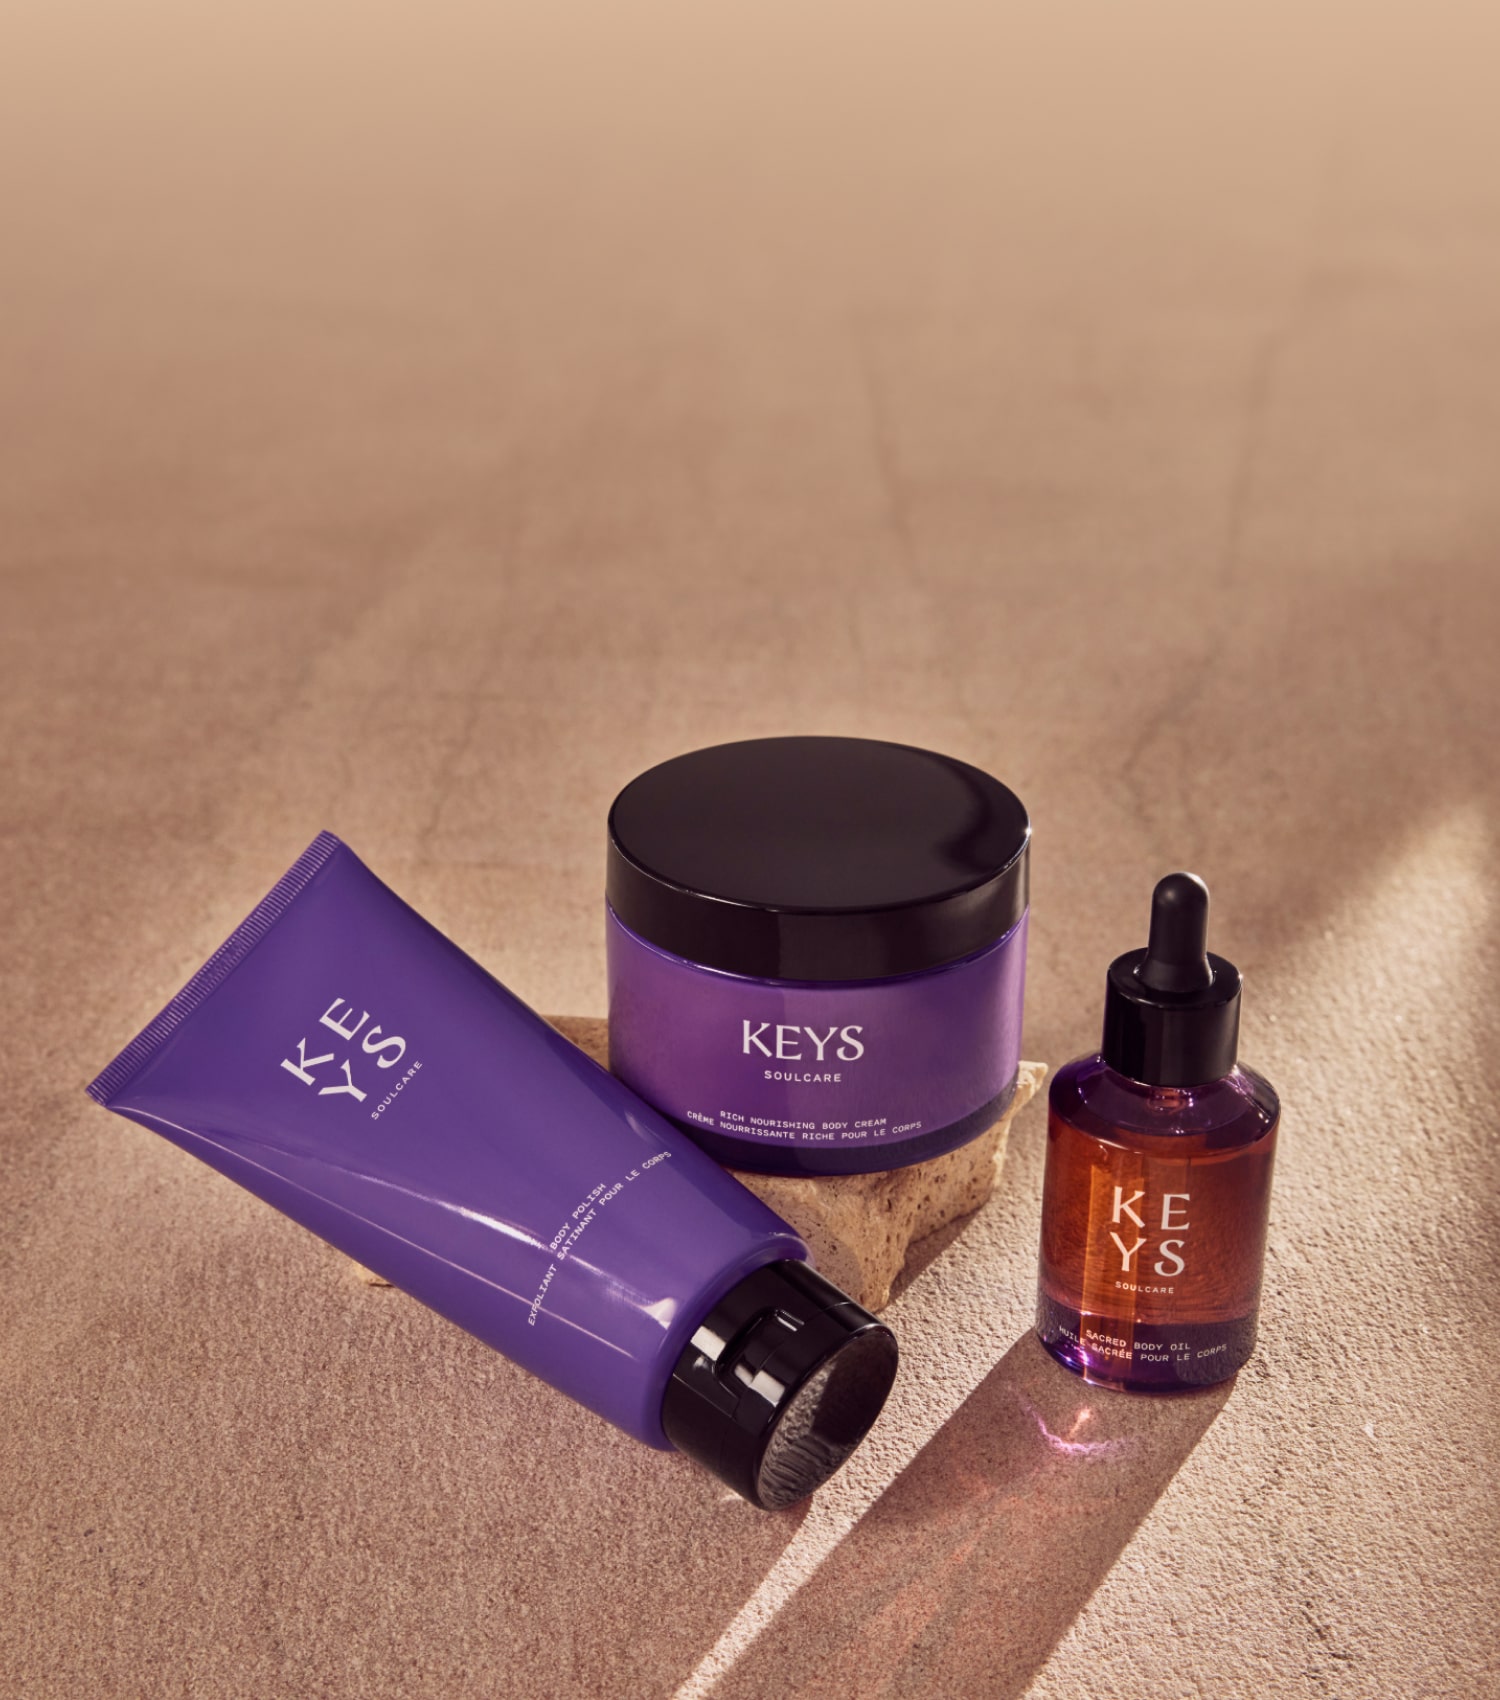 Promotional banner displaying a collection of body care products from the 'KEYS Soulcare' line. The products are arranged on a textured beige surface that resembles soft fabric, bathed in warm light that creates a relaxed ambiance. From left to right, there is a purple squeeze tube, possibly for body wash, a large black-lidded jar labeled 'Nourishing Body Cream', and a smaller purple glass dropper bottle likely containing body oil. The text 'BODY CARE' is in large, uppercase black letters, with a tagline underneath that reads 'Care for your whole self with body wash, body oil, tools, and more.